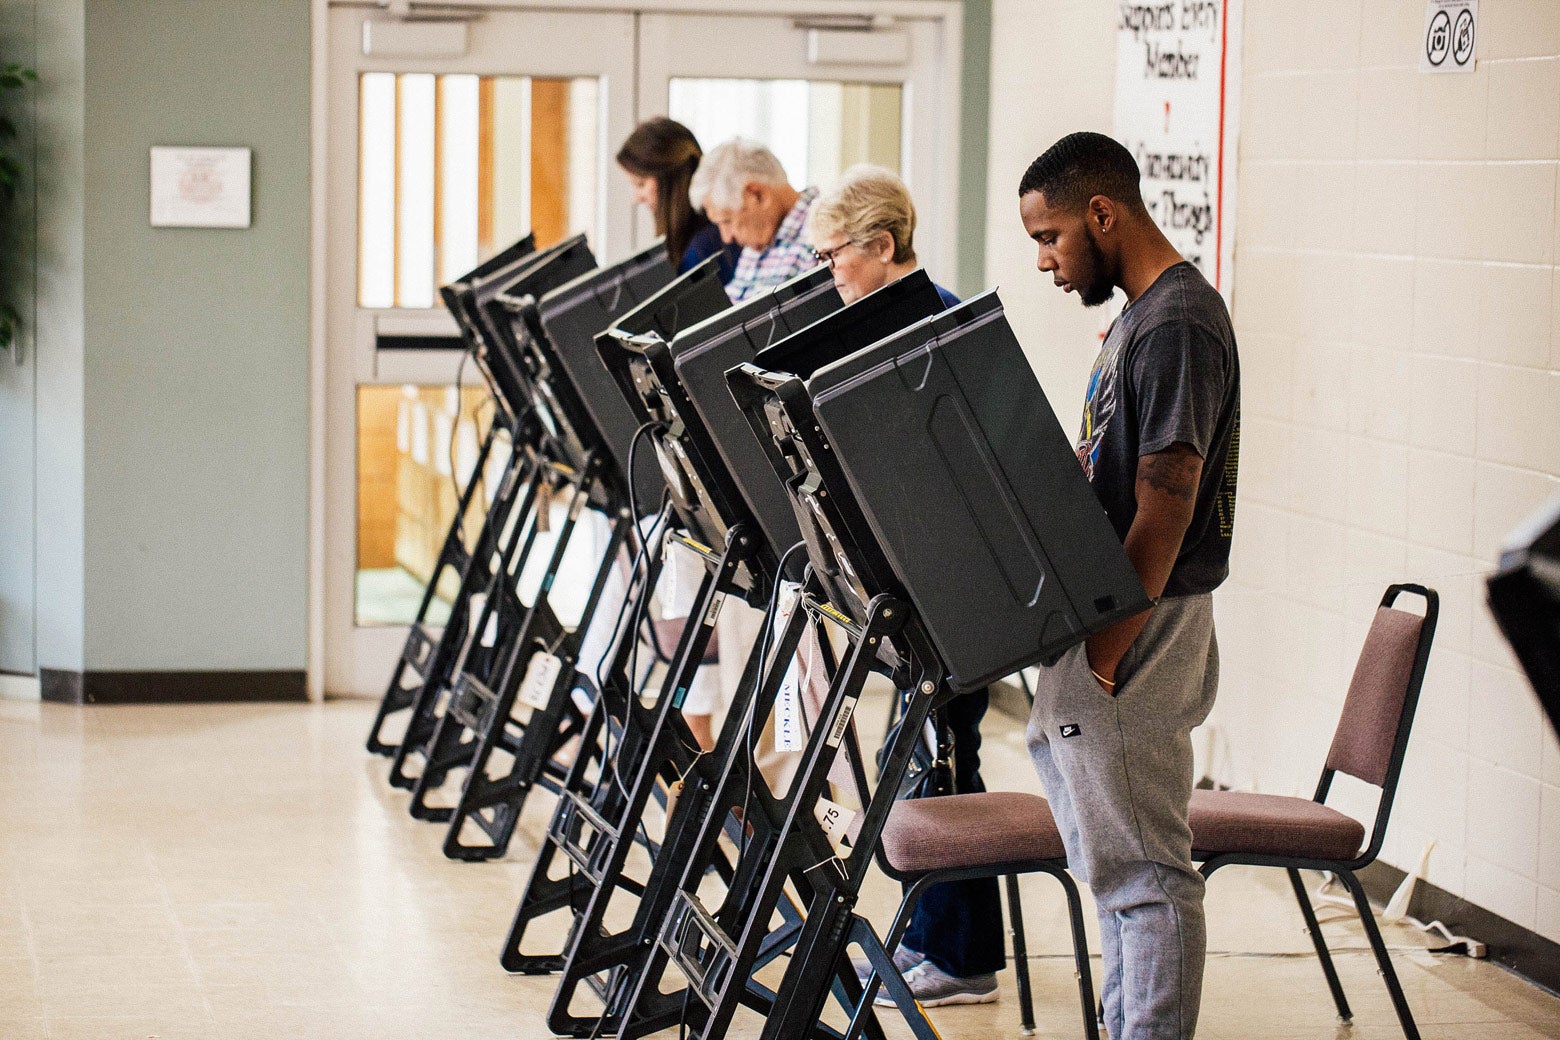 A row of voters voting at booths.